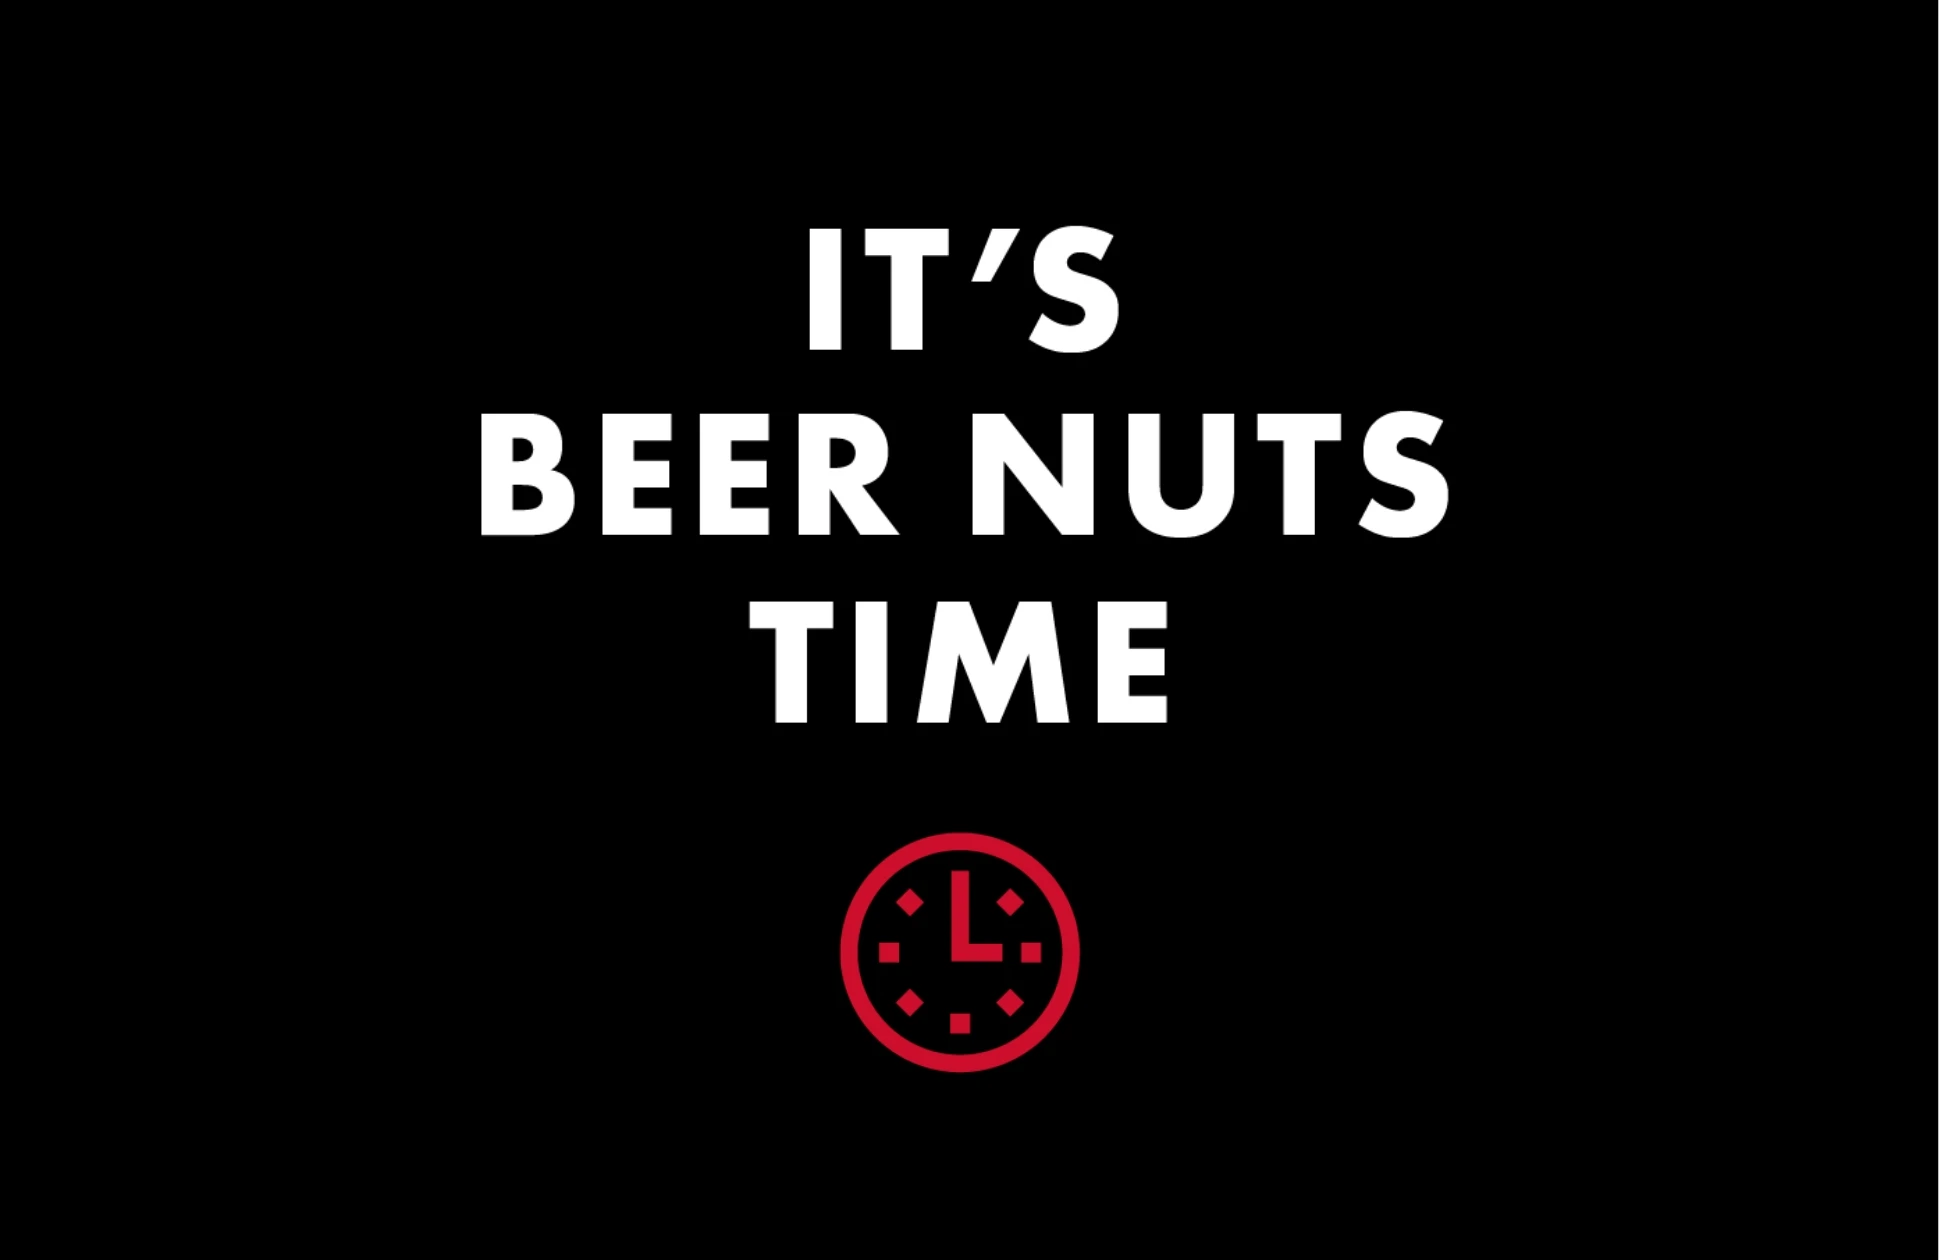 It's Beer Nuts time and a clock.